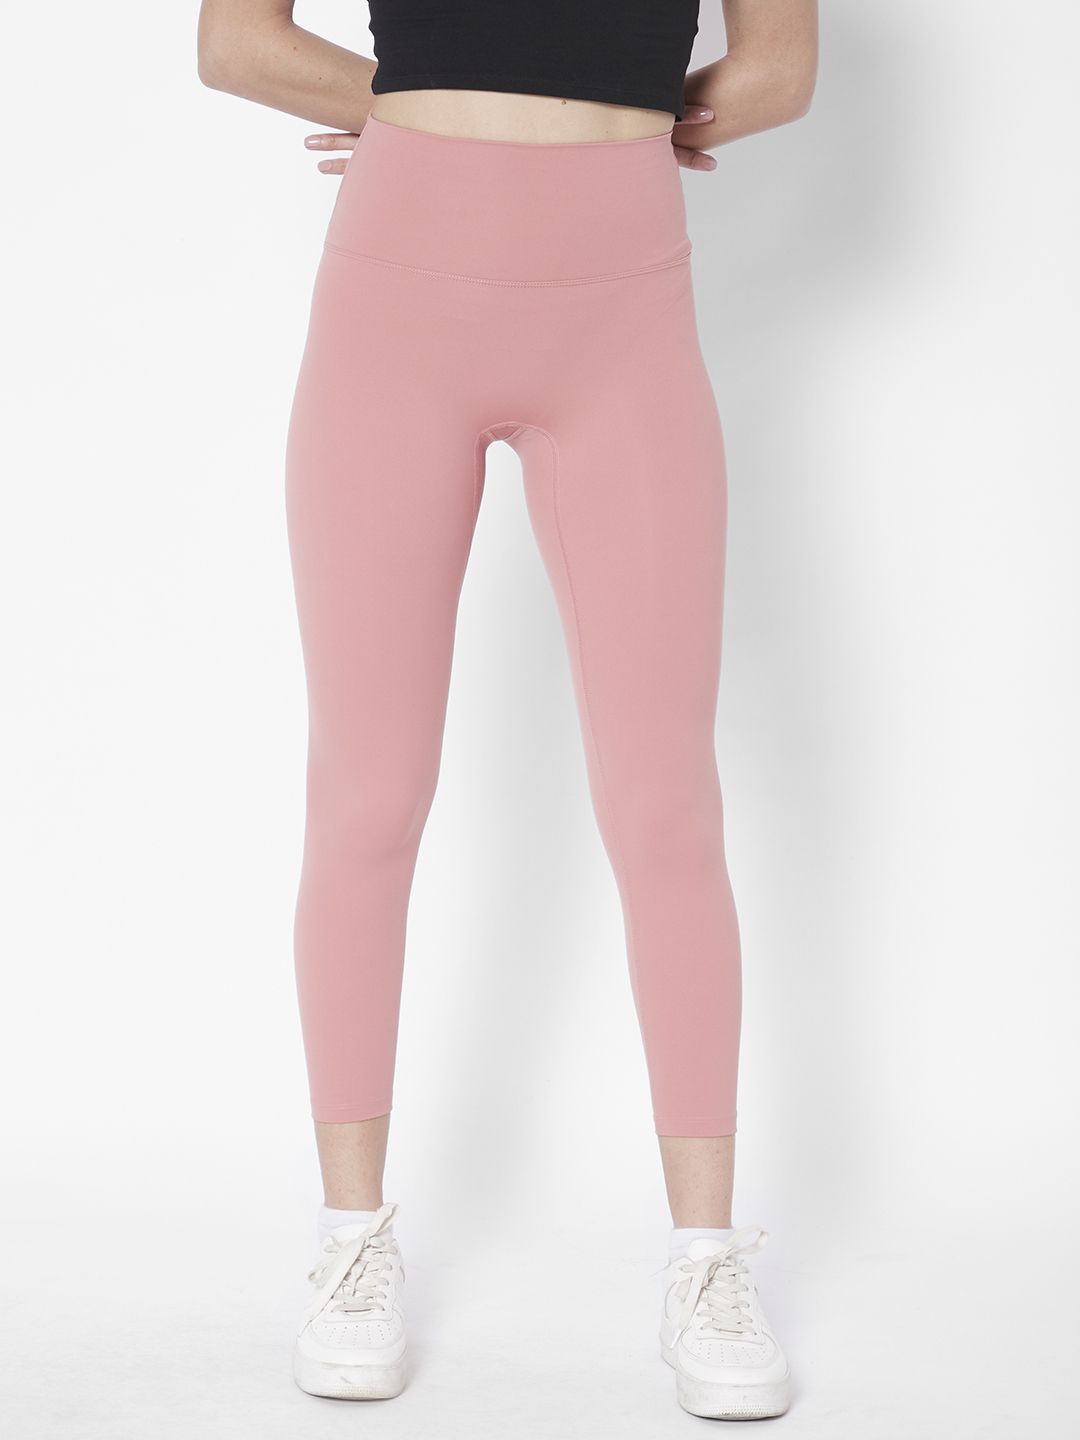 URBANIC Women Pink Solid High-Rise Gym Tights Price in India